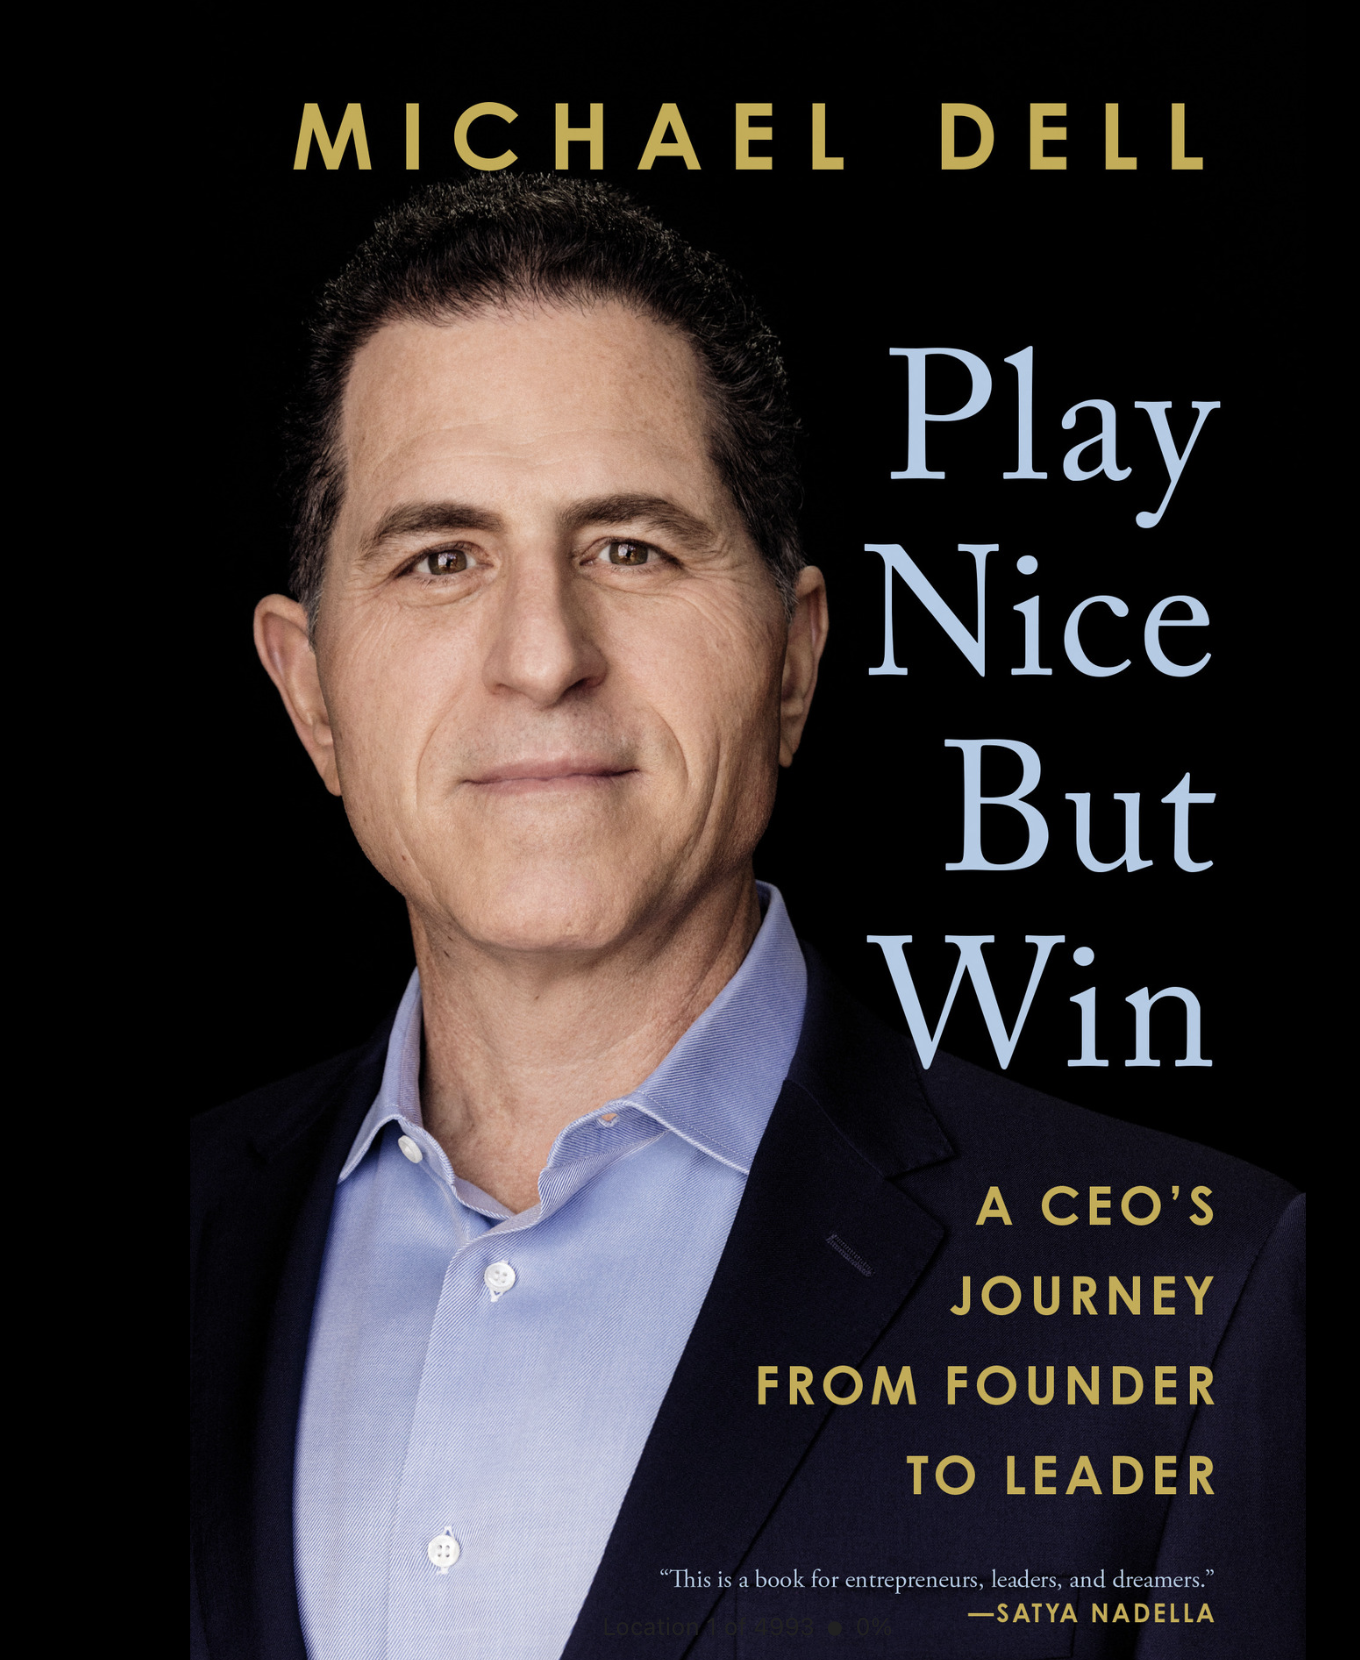 Play Nice but Win by Michael Dell